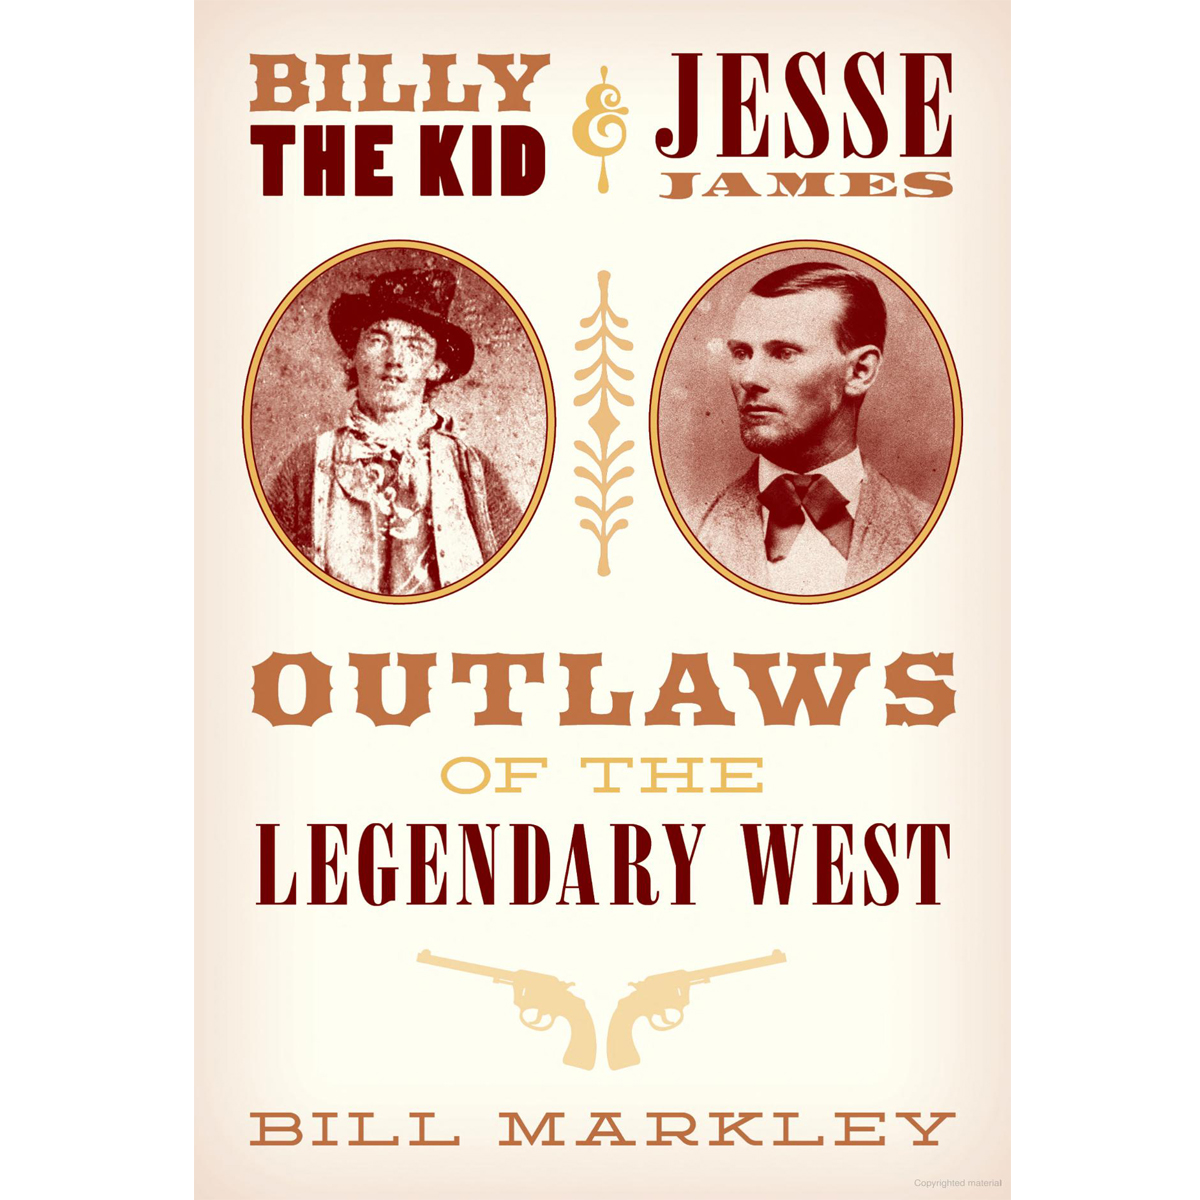 Legendary Outlaws of the West